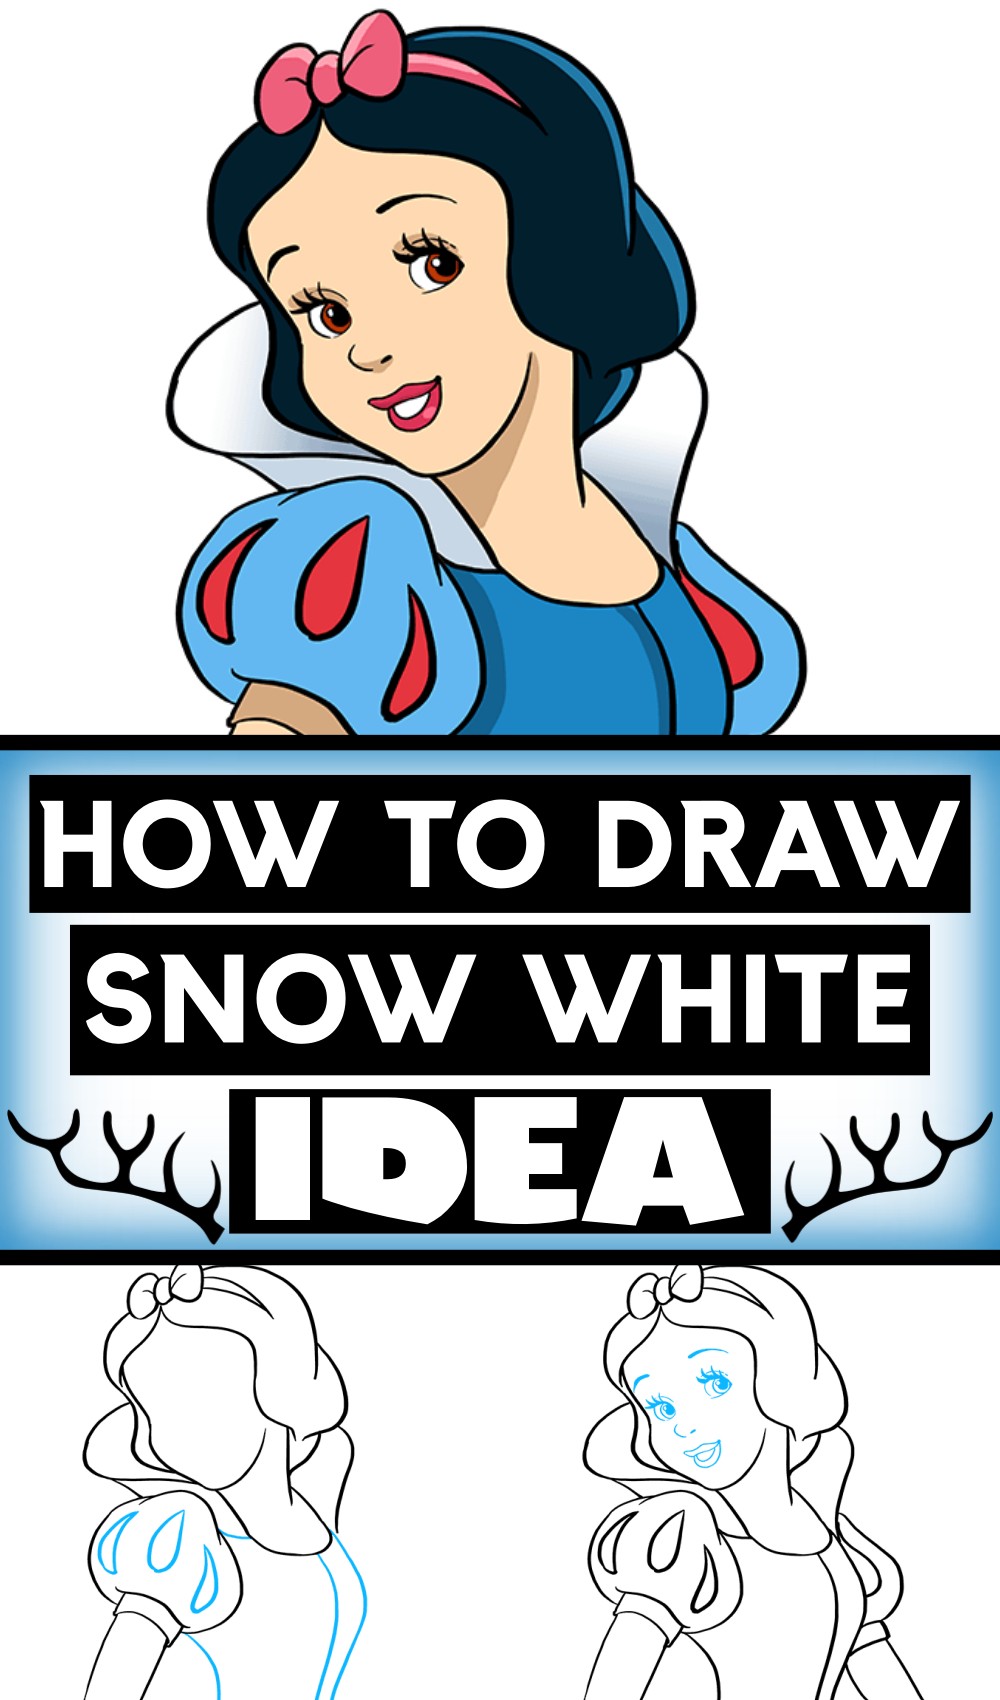 How To Draw Snow White